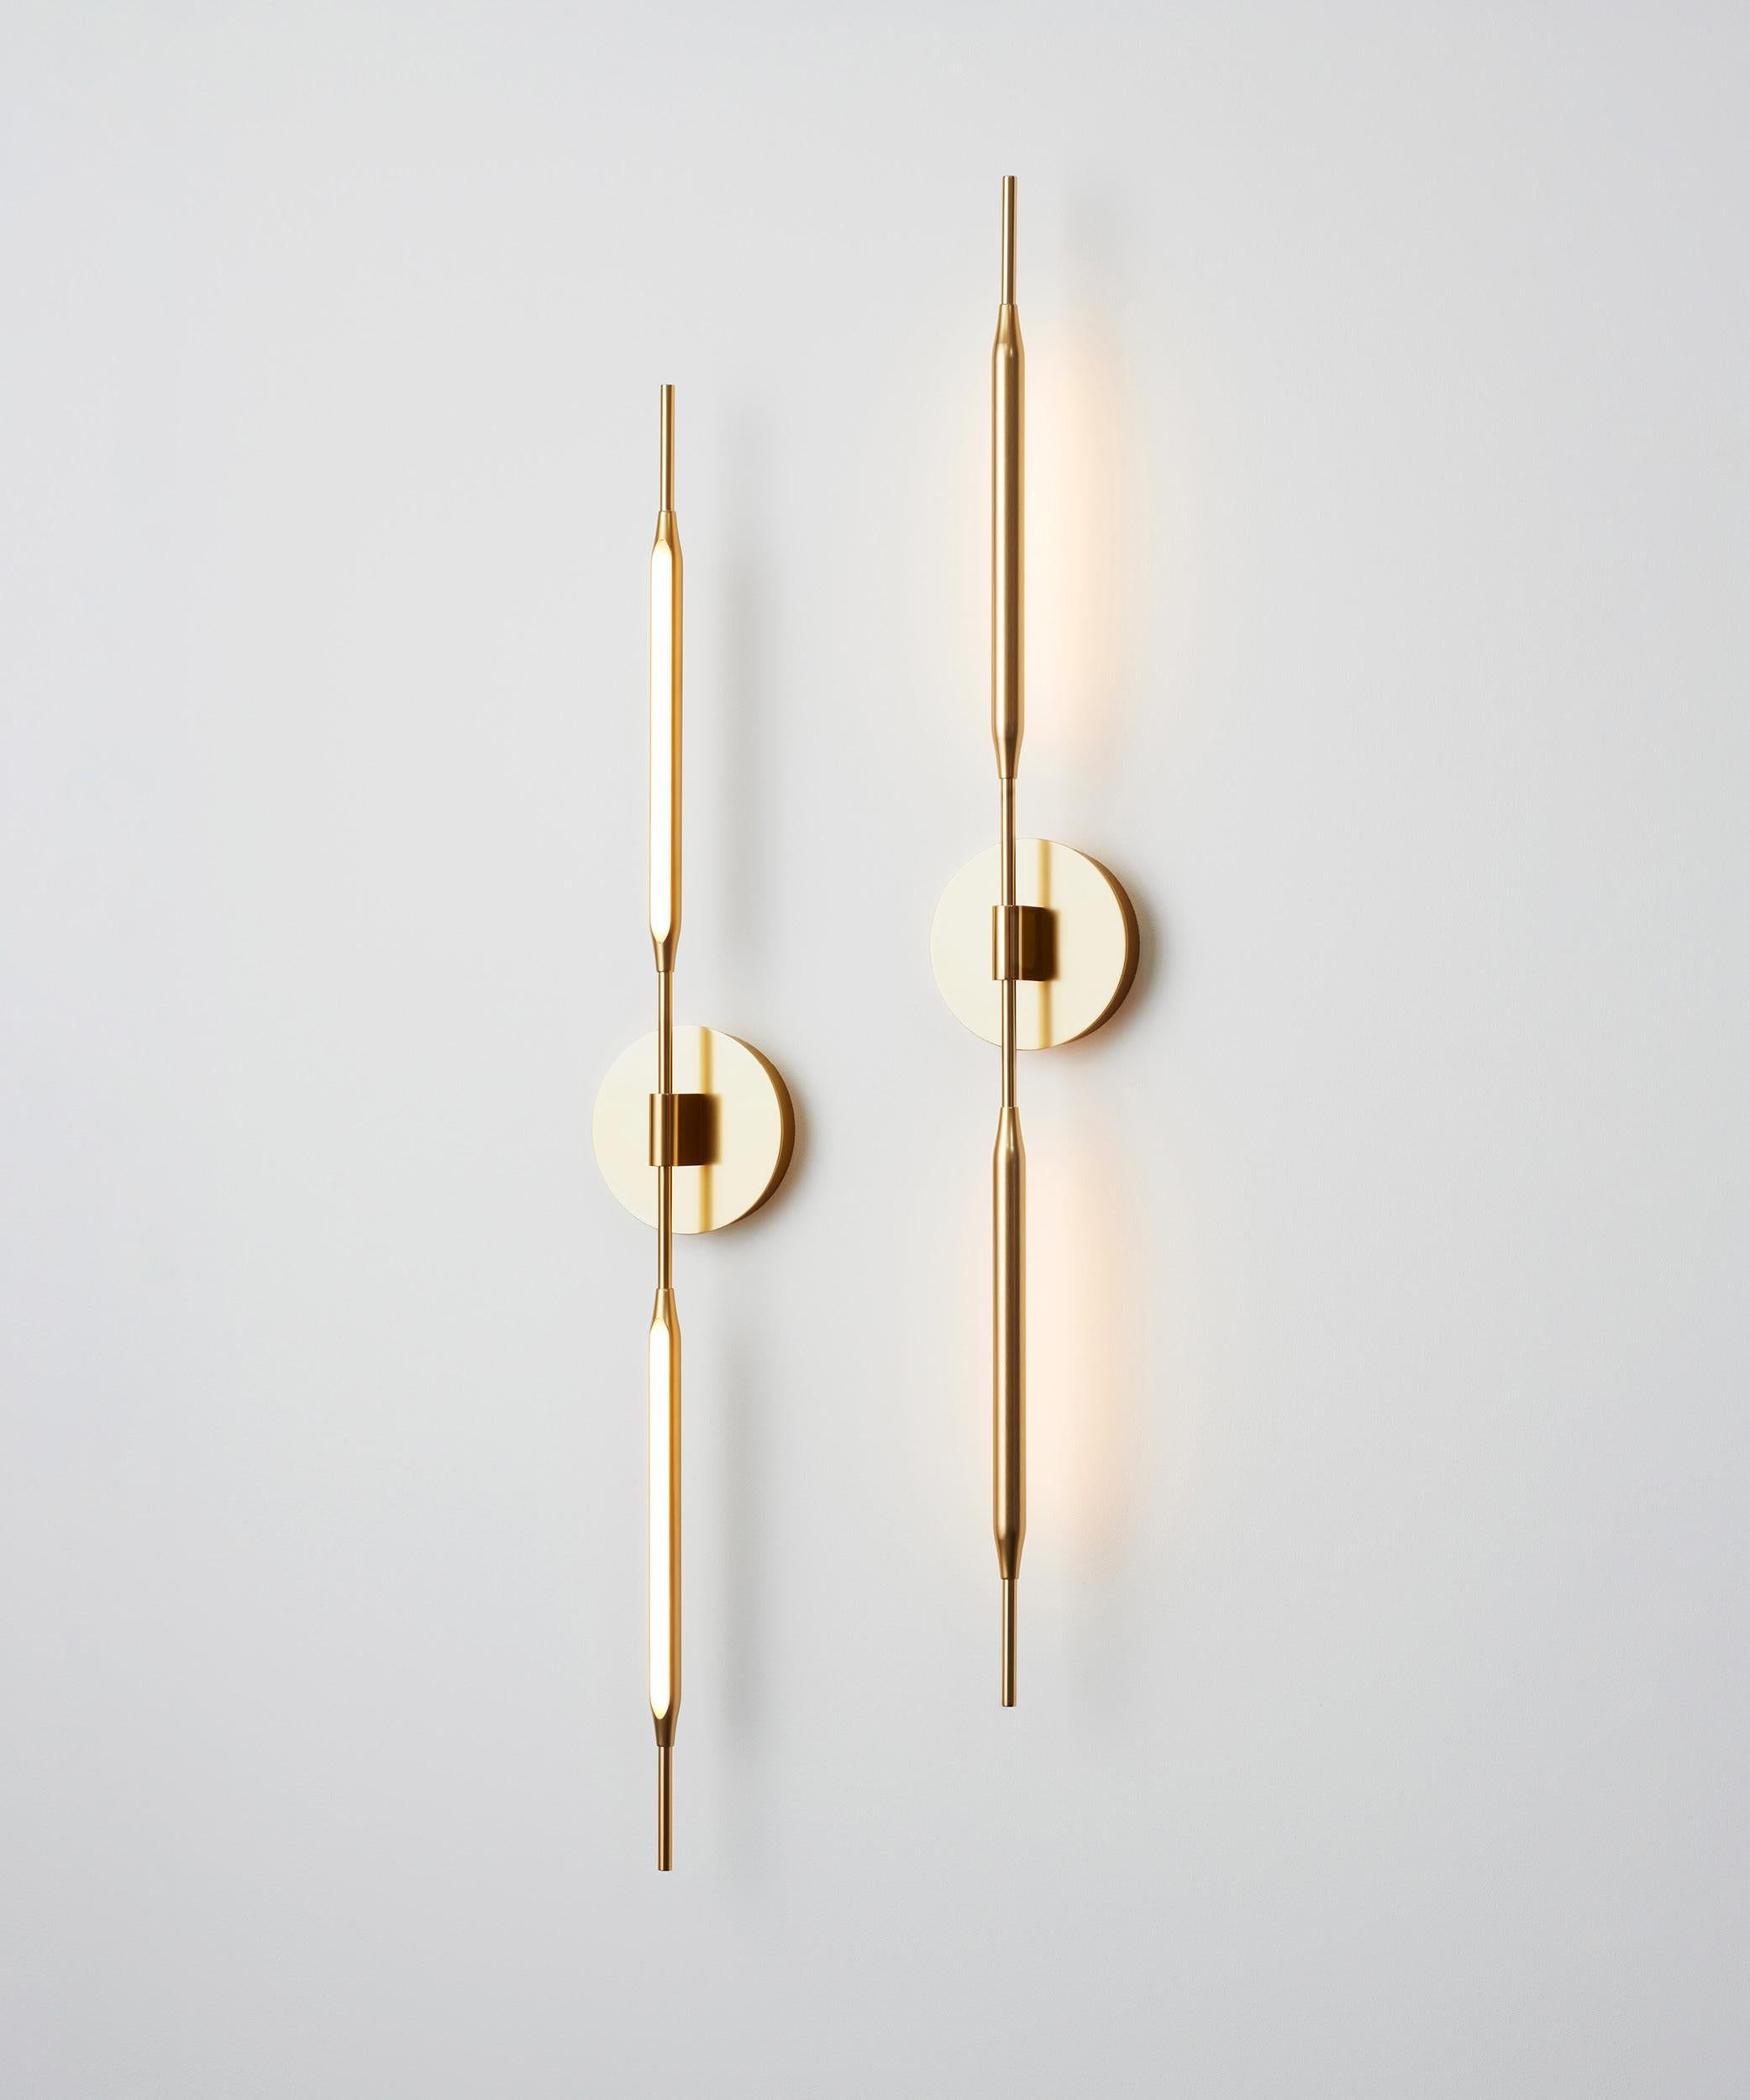 British Reed Wall Light in Brushed Brass Finish, UL Listed For Sale